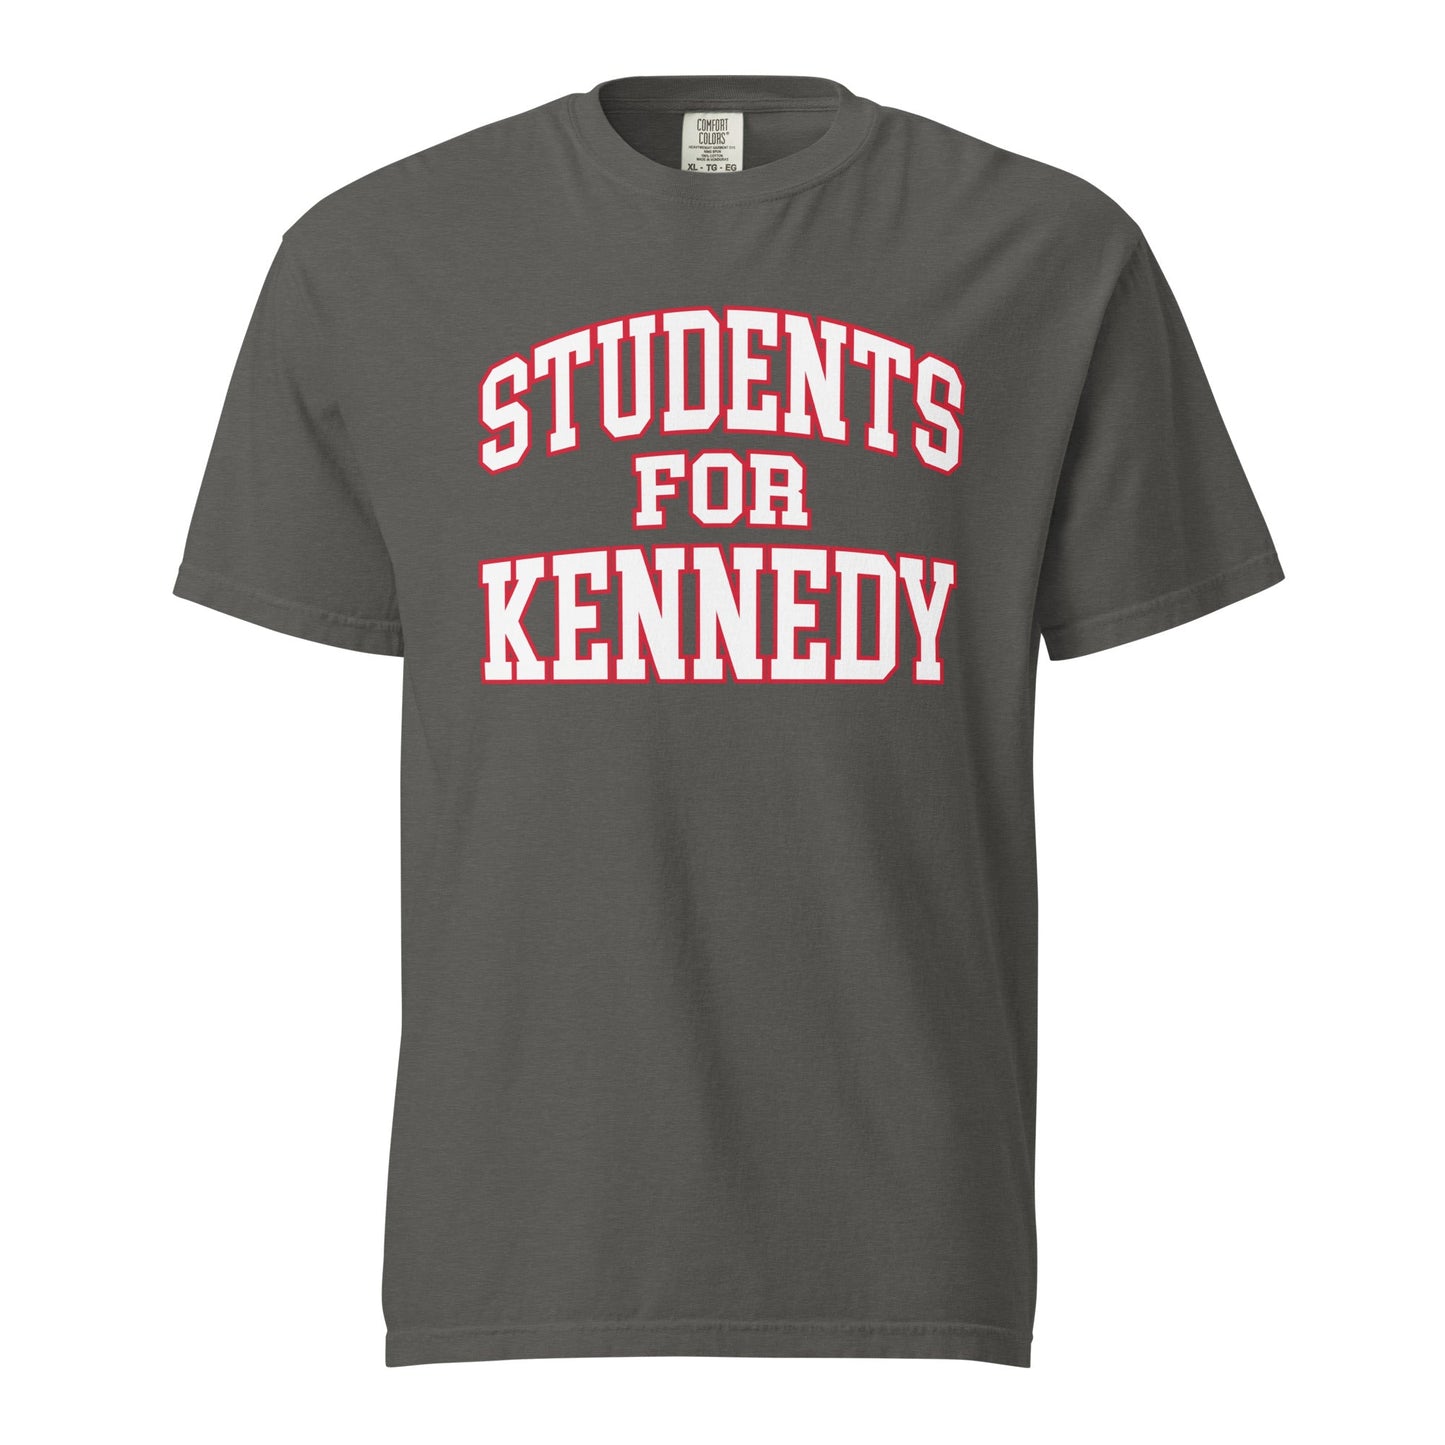 Students For Kennedy Heavyweight Tee - TEAM KENNEDY. All rights reserved